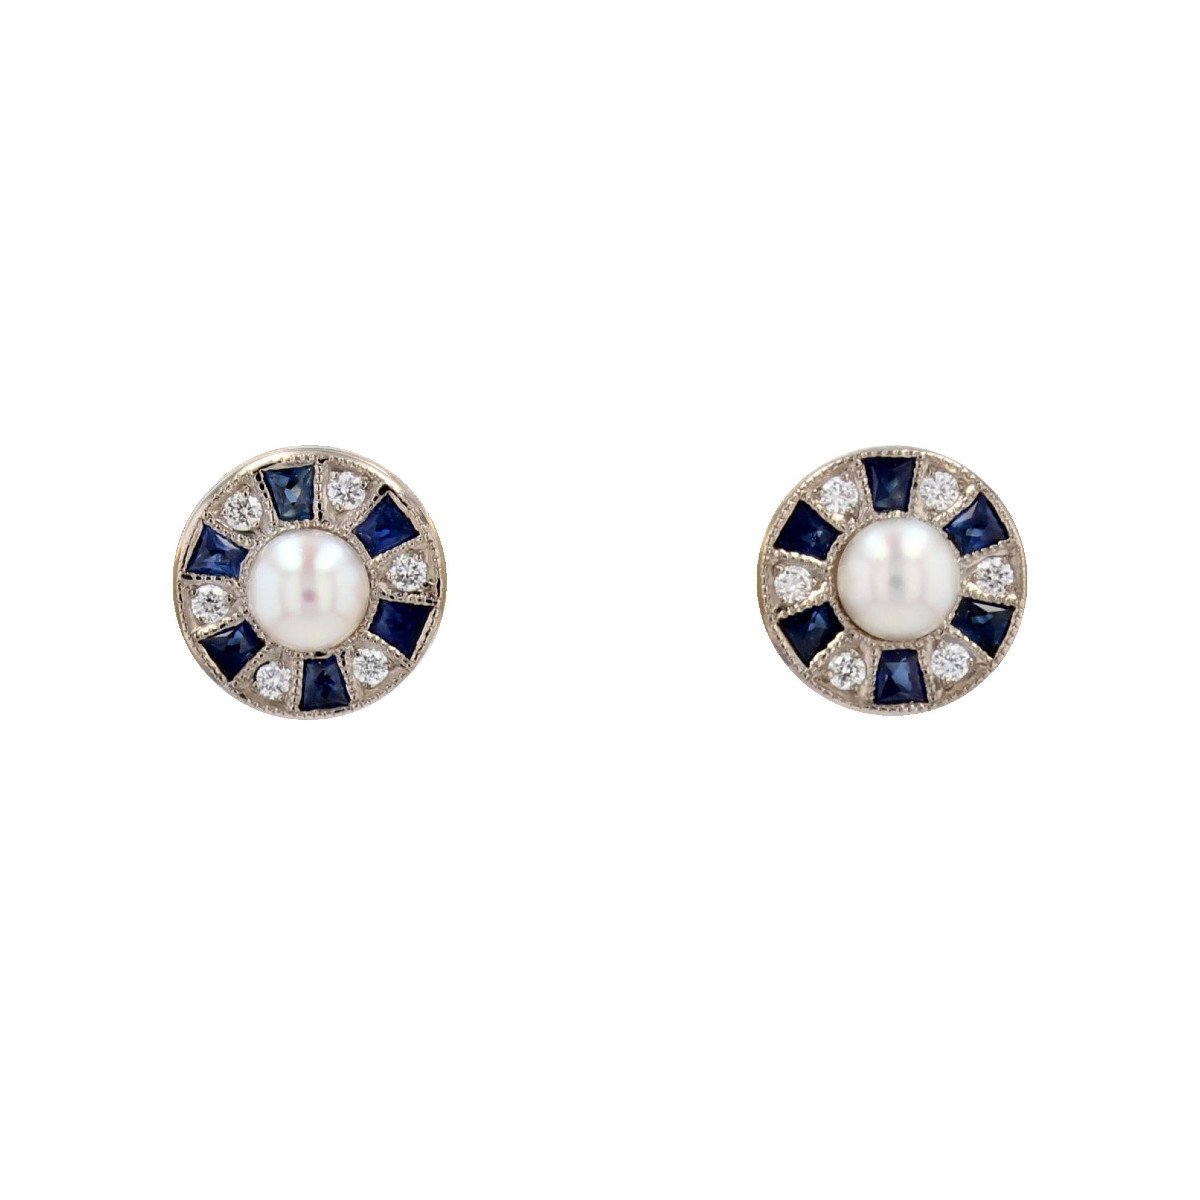 Calibrated Diamond And Sapphire Pearl Earrings